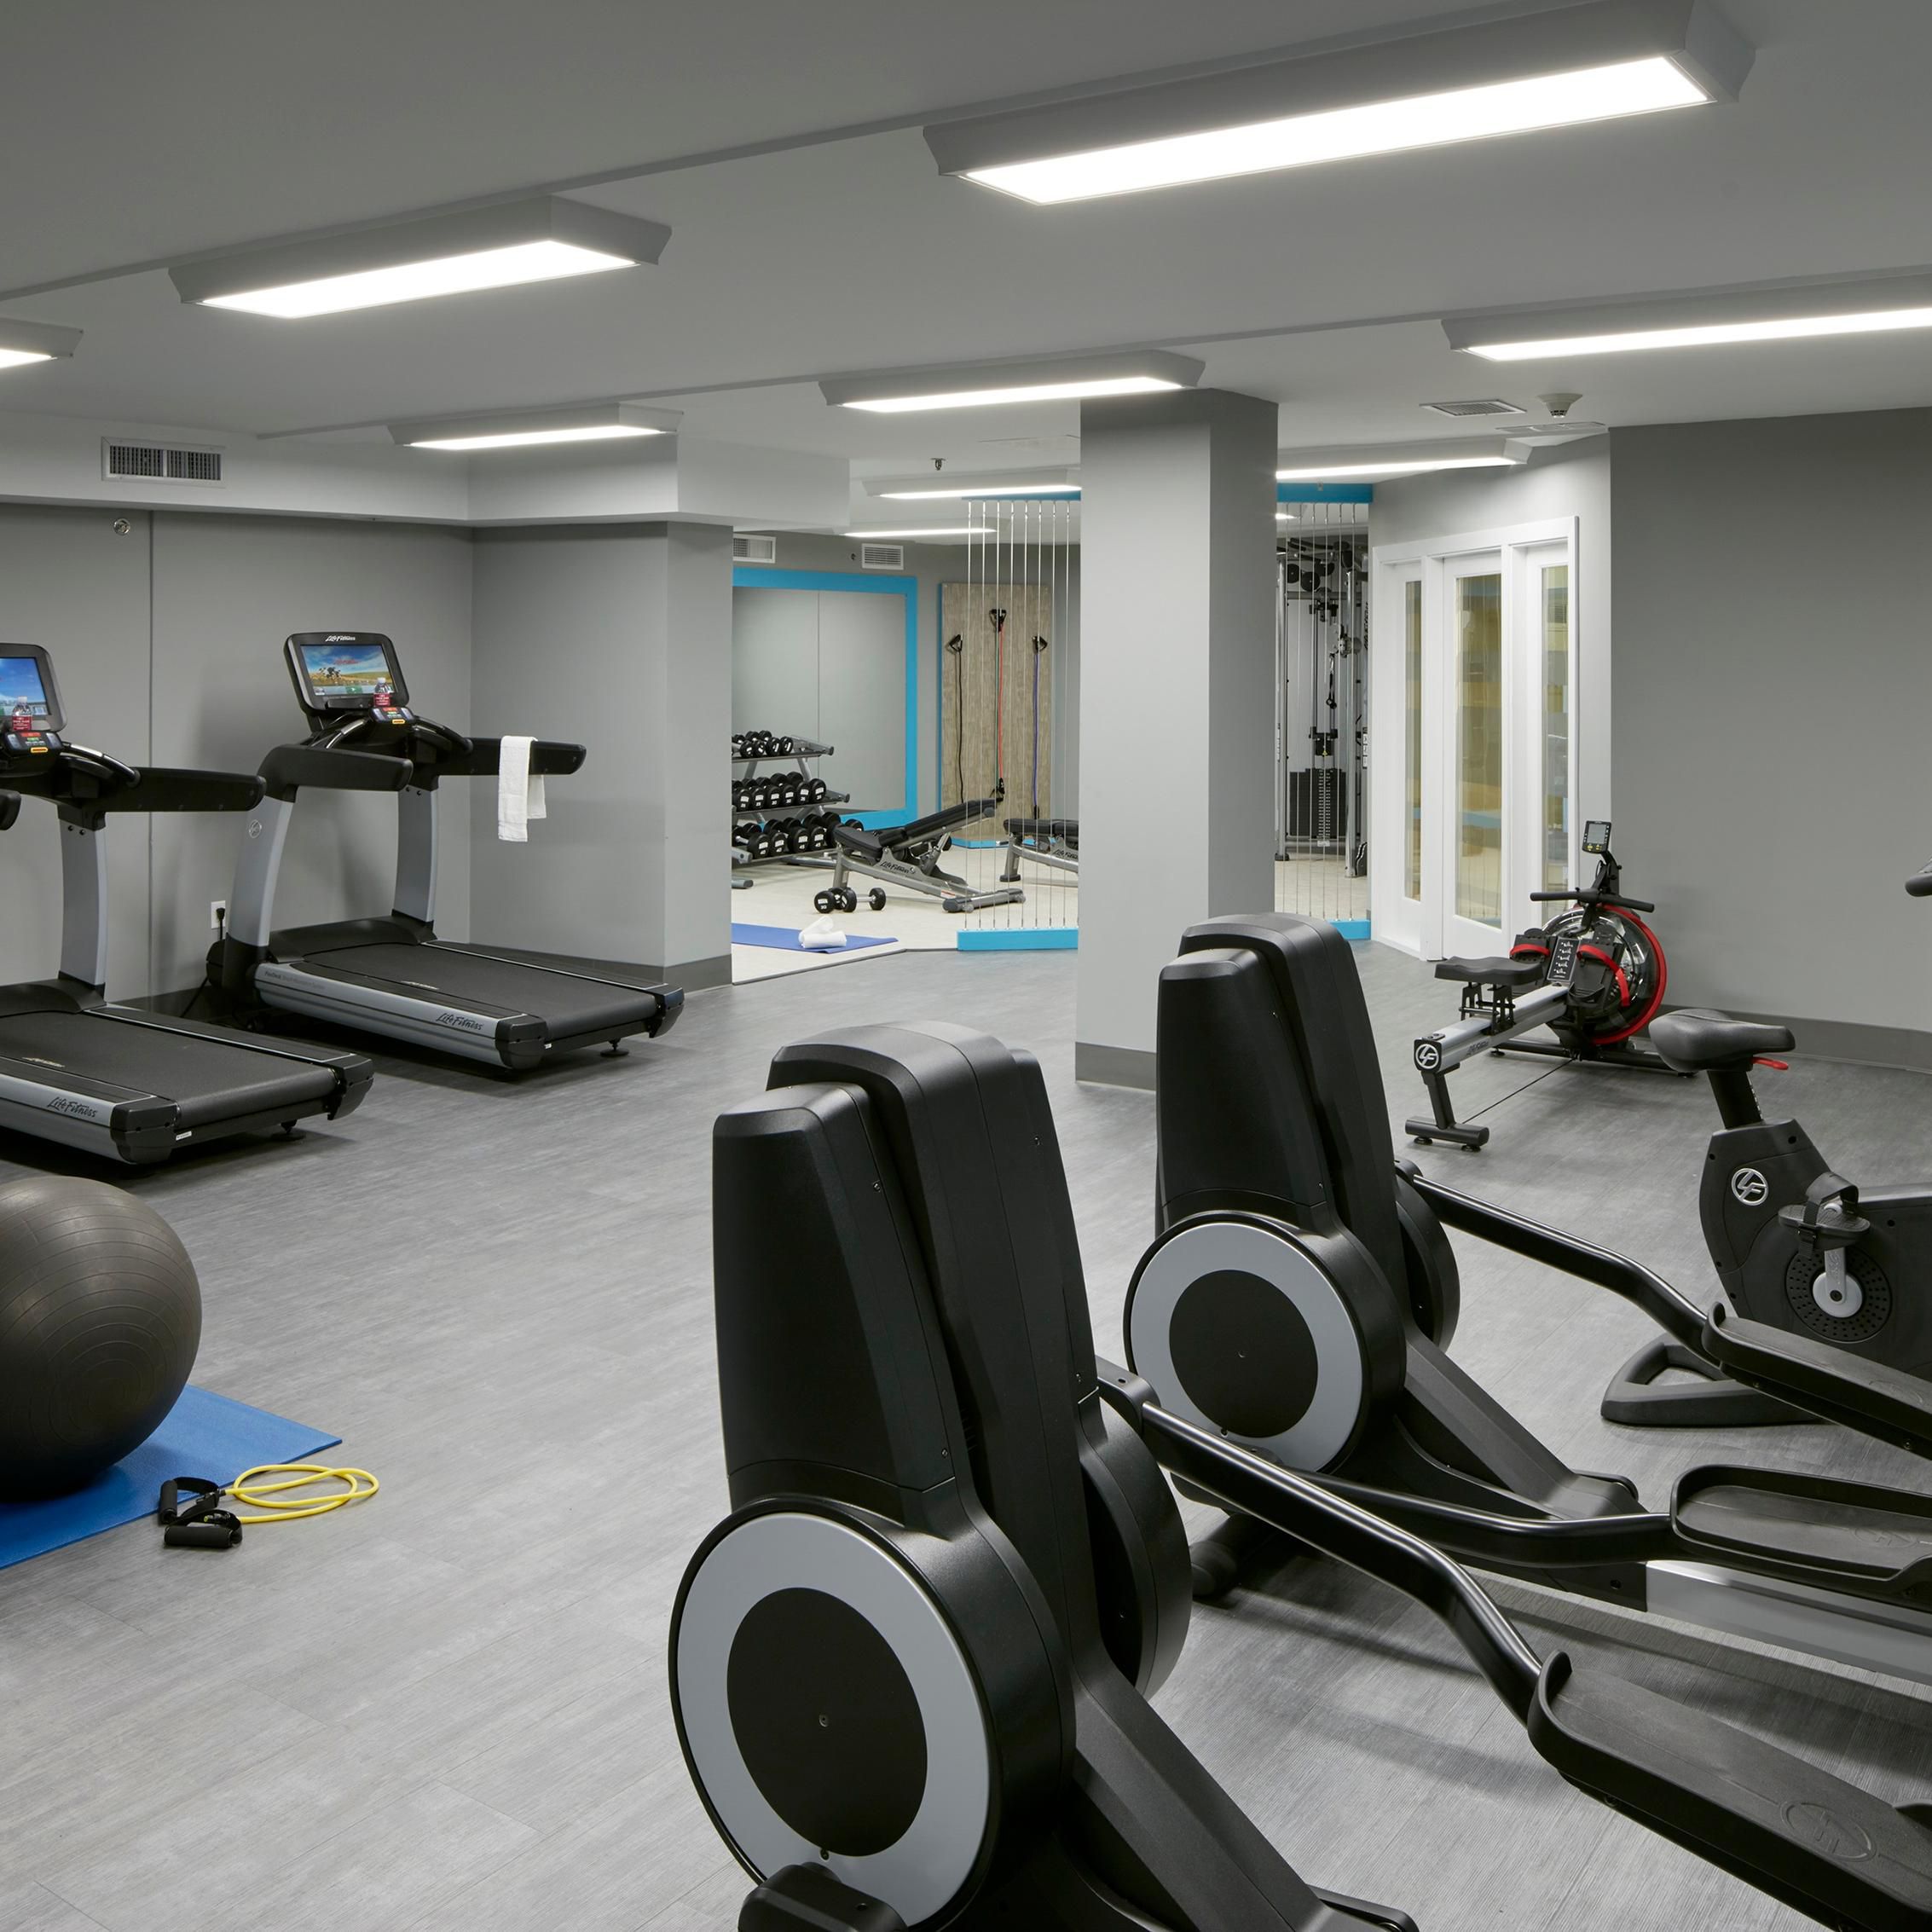 Enjoy the state-of-the-art equipment in the Fitness Center